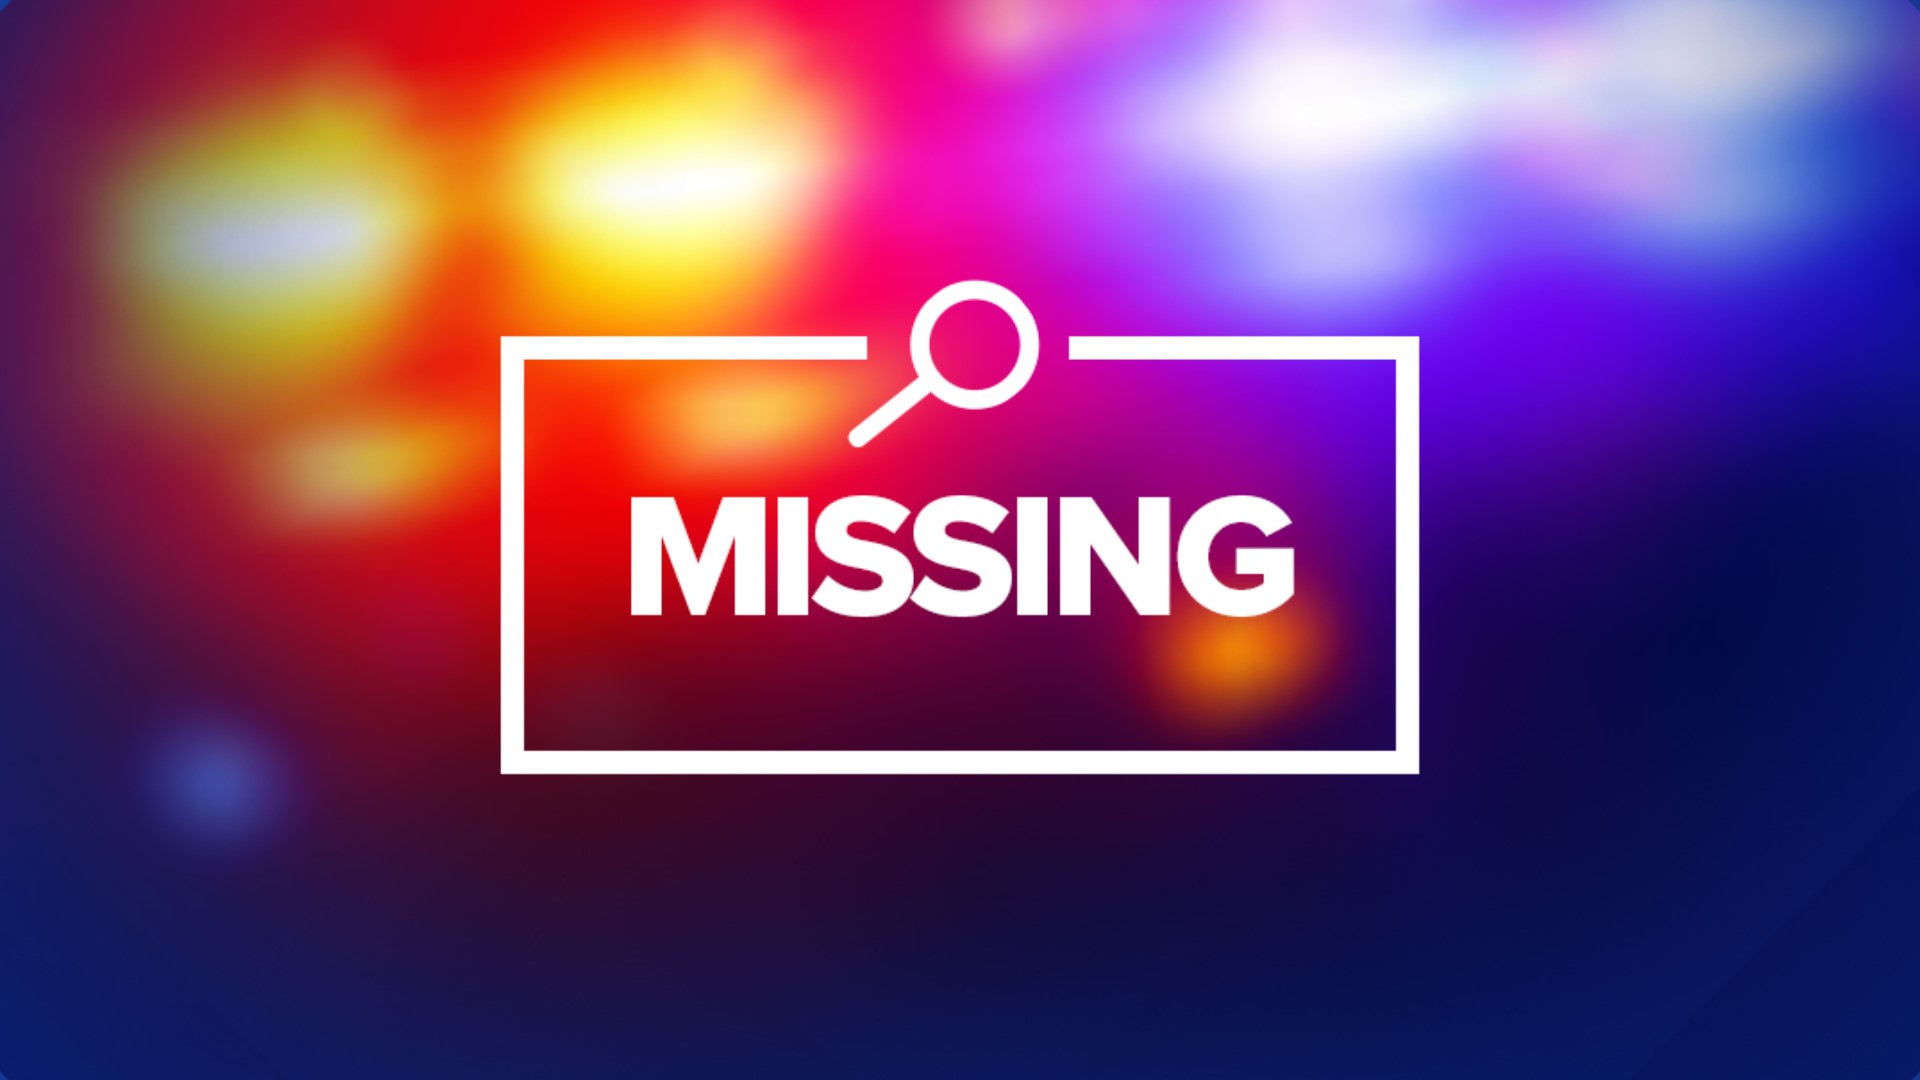 The 75-year-old man was last seen Tuesday in Loyalsock Township.